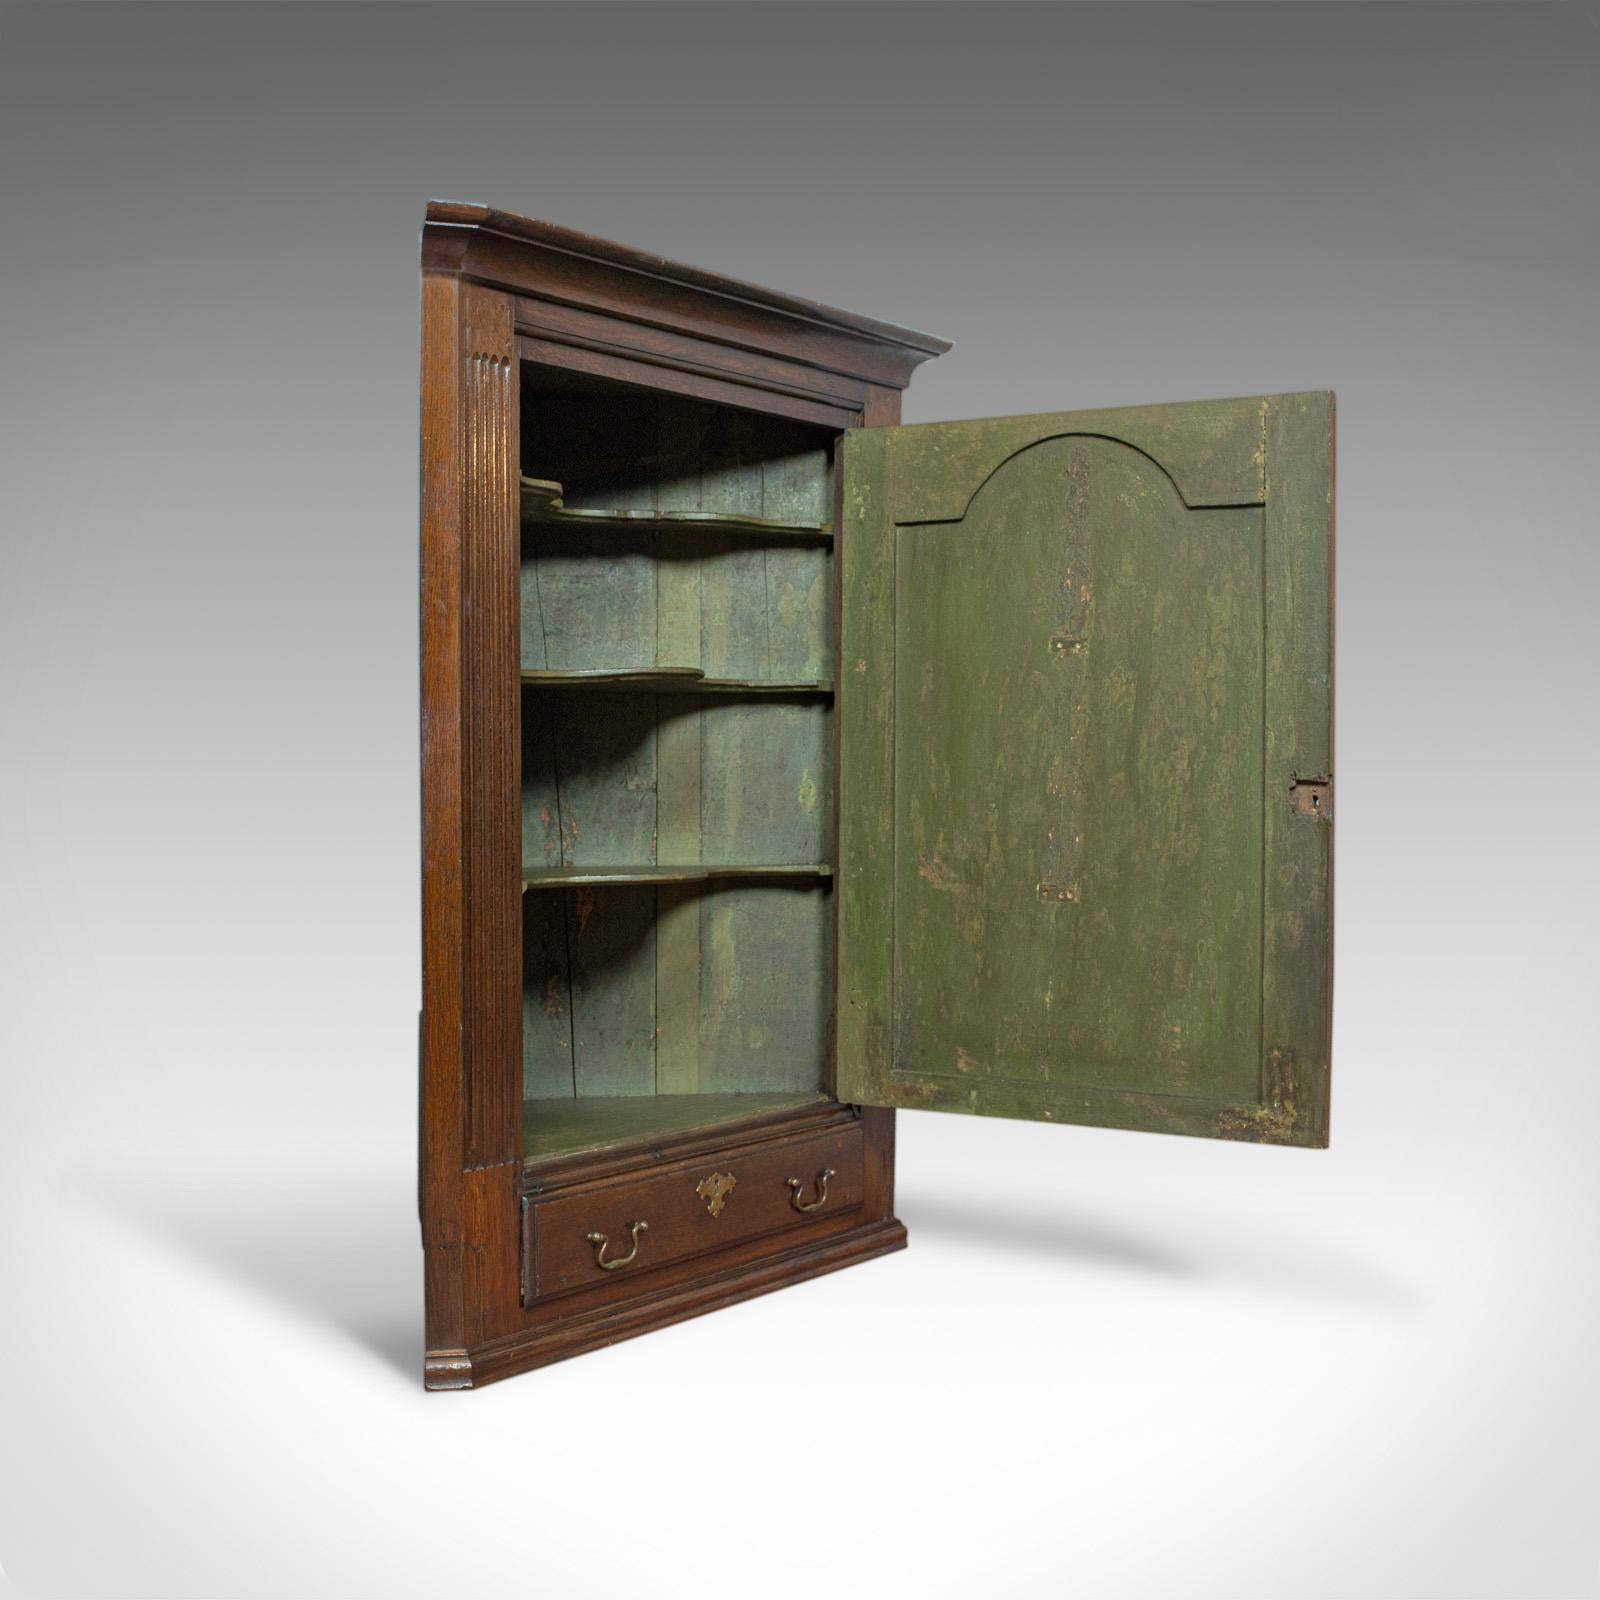 This is an antique corner cabinet. An English, Georgian, oak, hanging wall cupboard dating to the late 18th century, circa 1780.

Select oak with rich hues and in desirable aged patina
Good consistent color throughout and fine grain